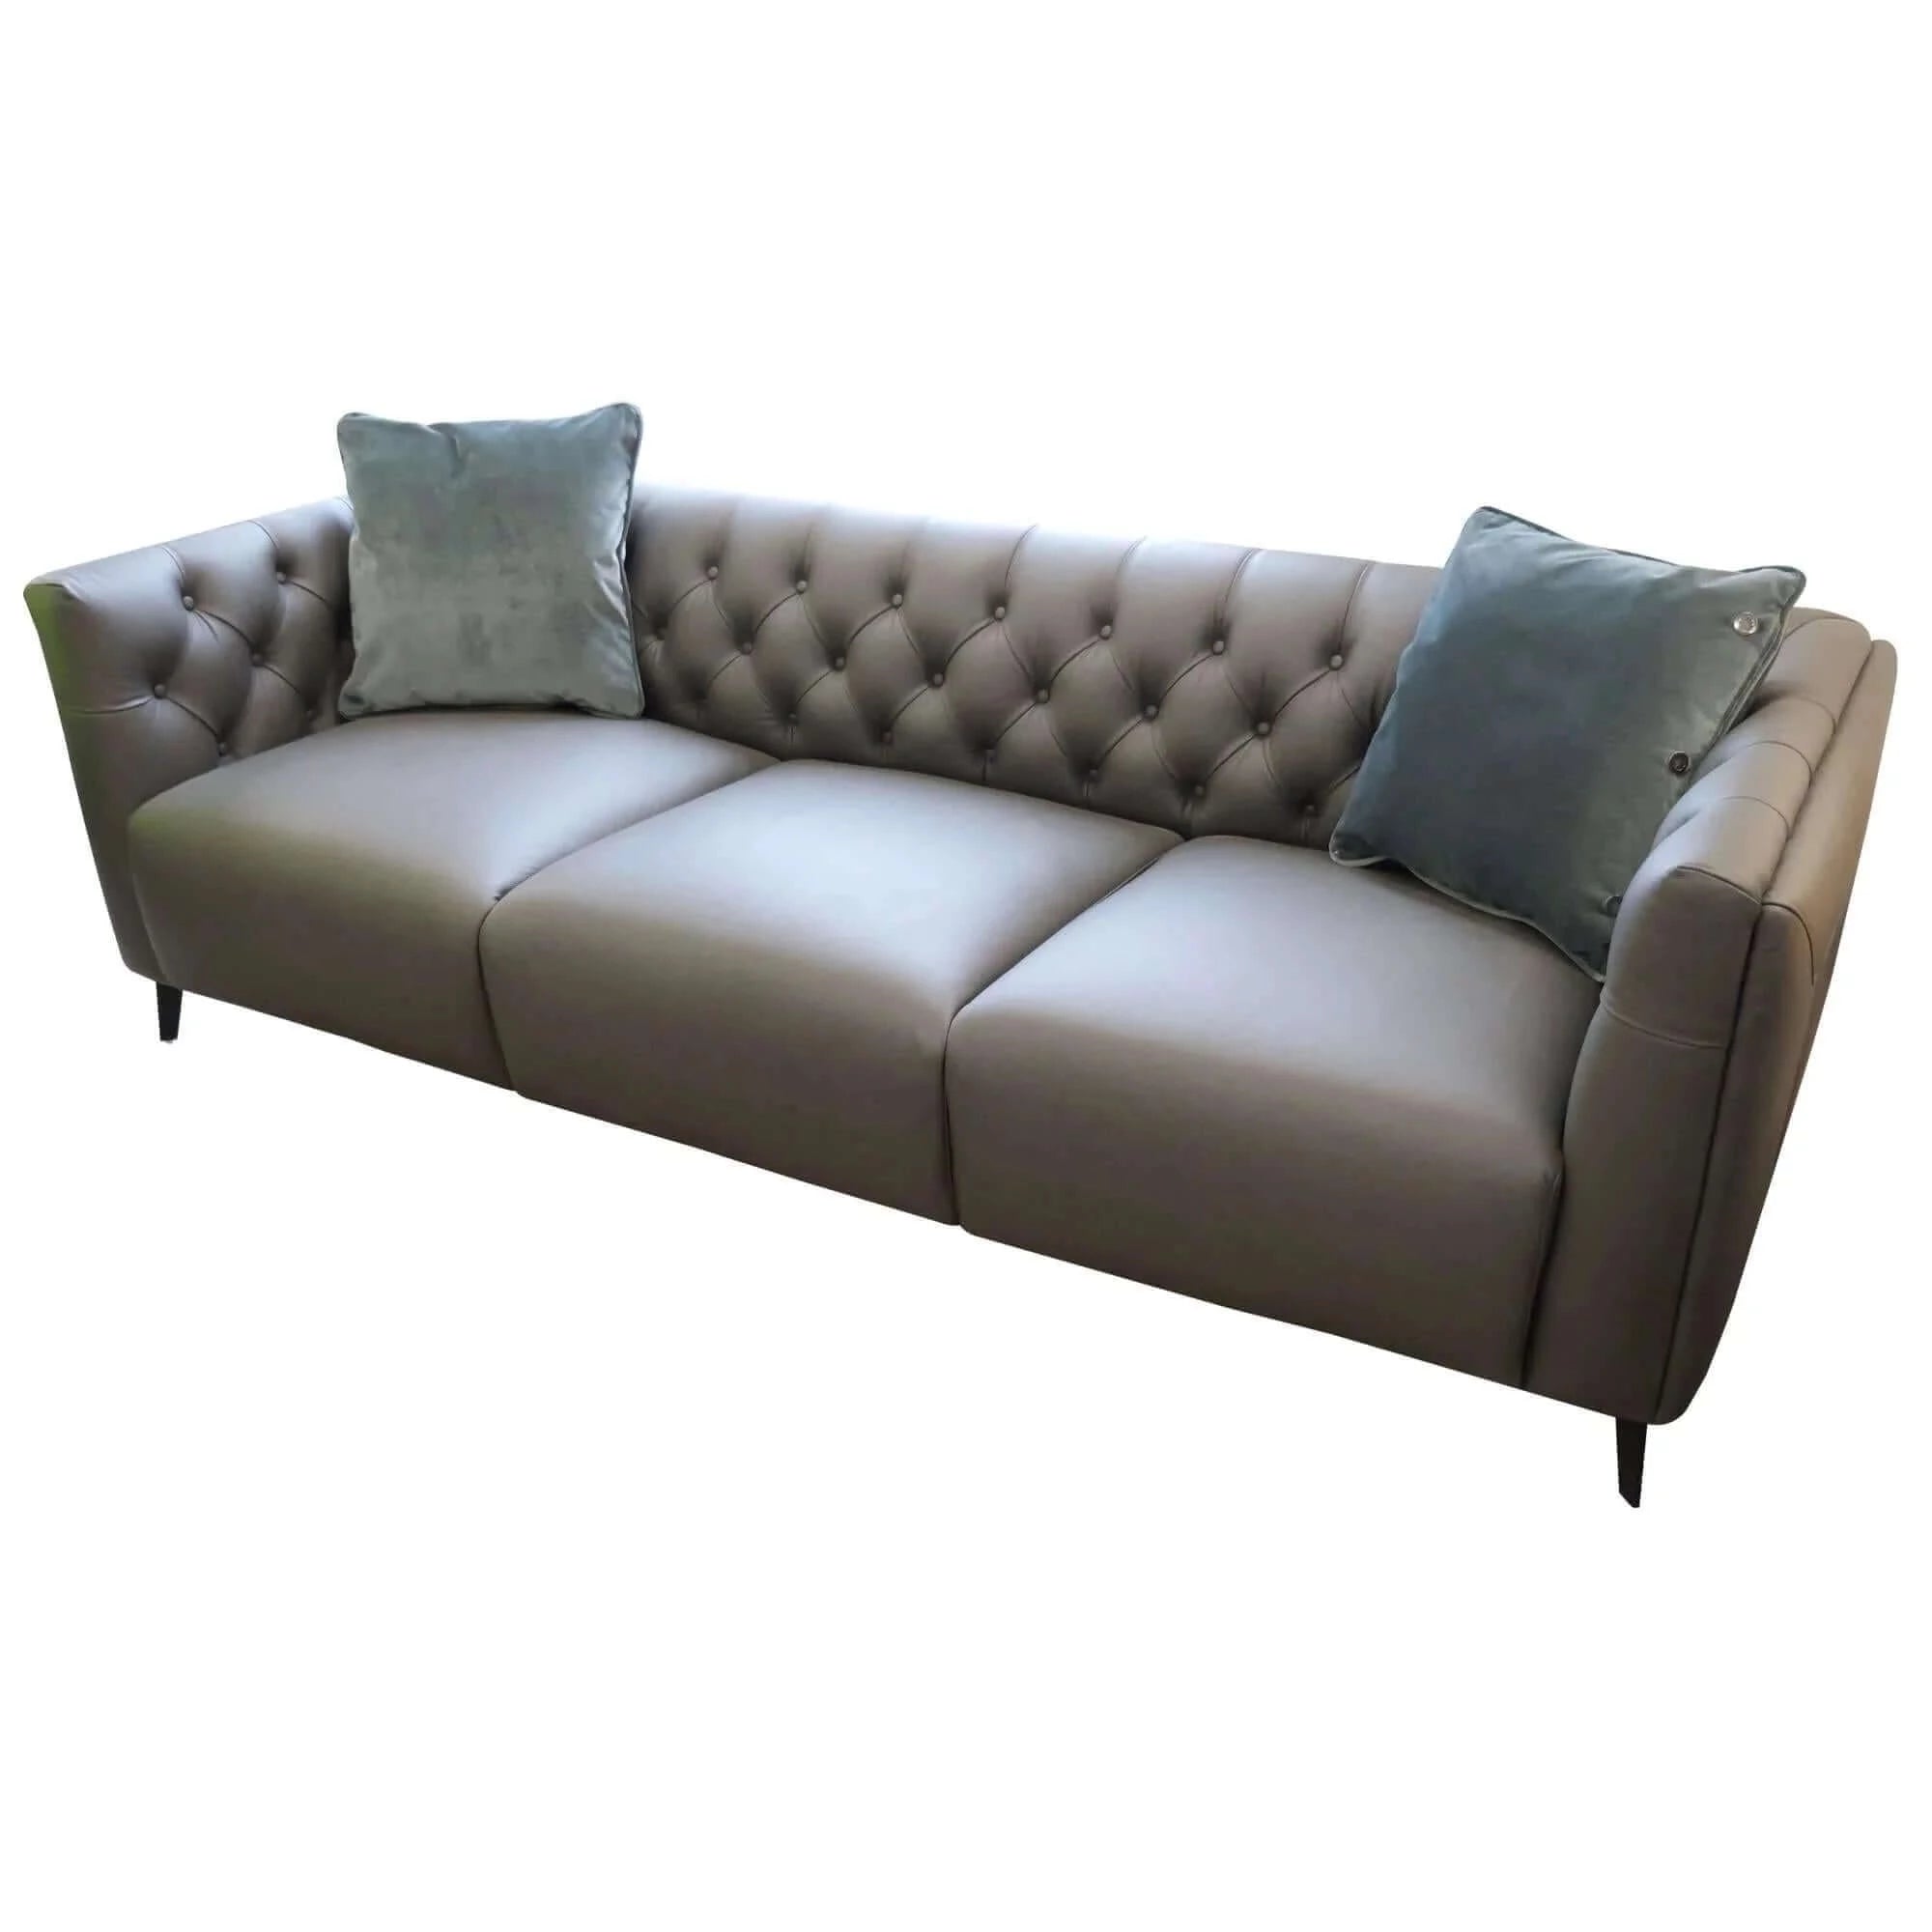 Buy luxe genuine forli leather sofa 3.5 seater upholstered lounge couch - dark grey - upinteriors-Upinteriors